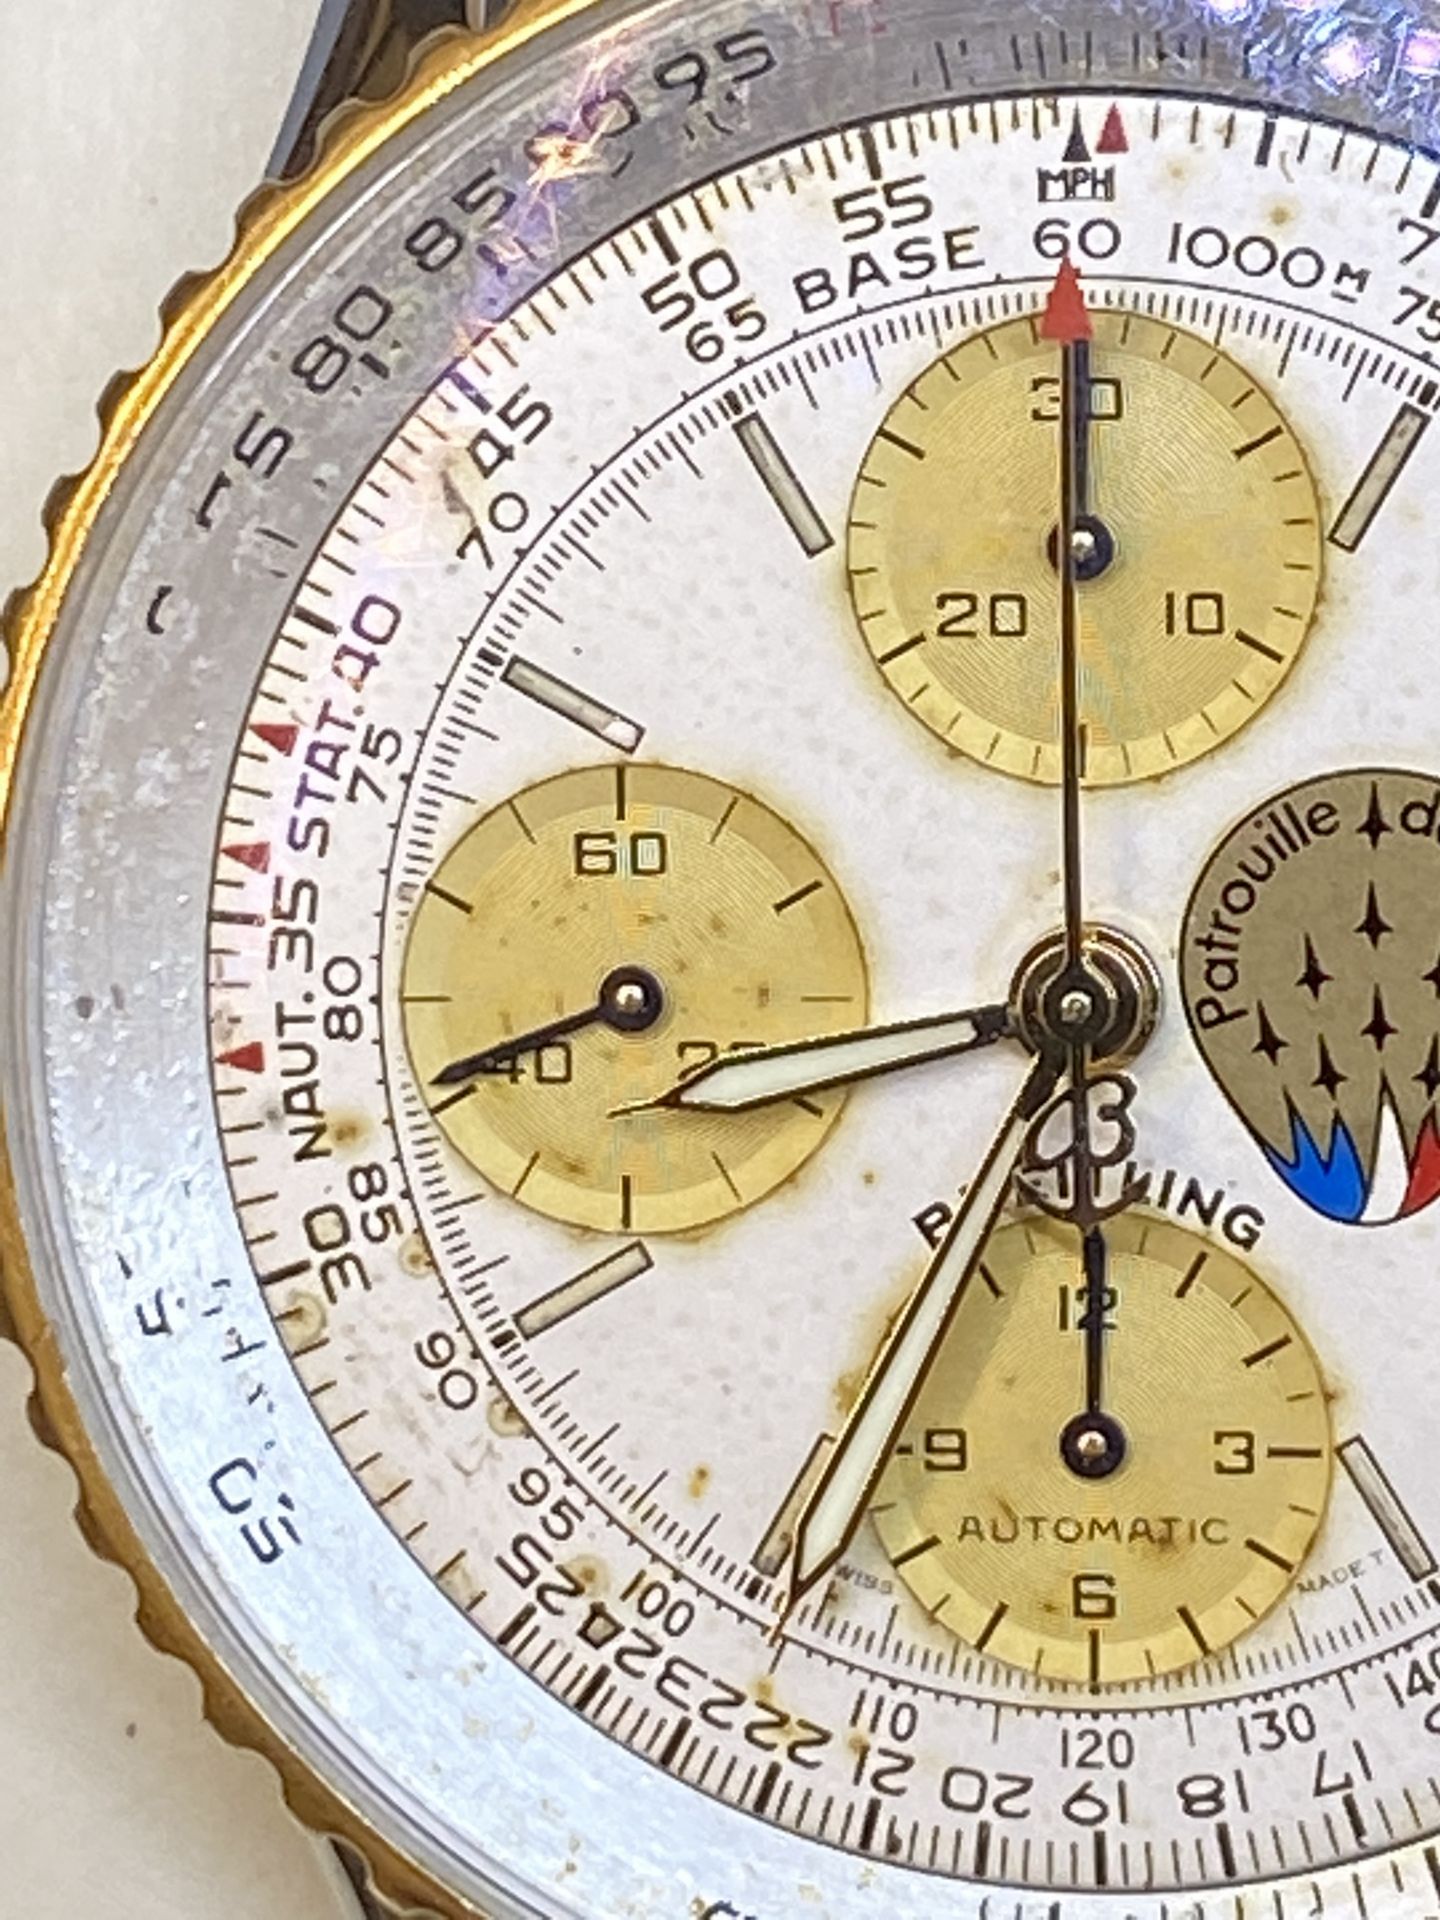 Breitling Navitimer Chronograph Watch with Box - Image 8 of 14